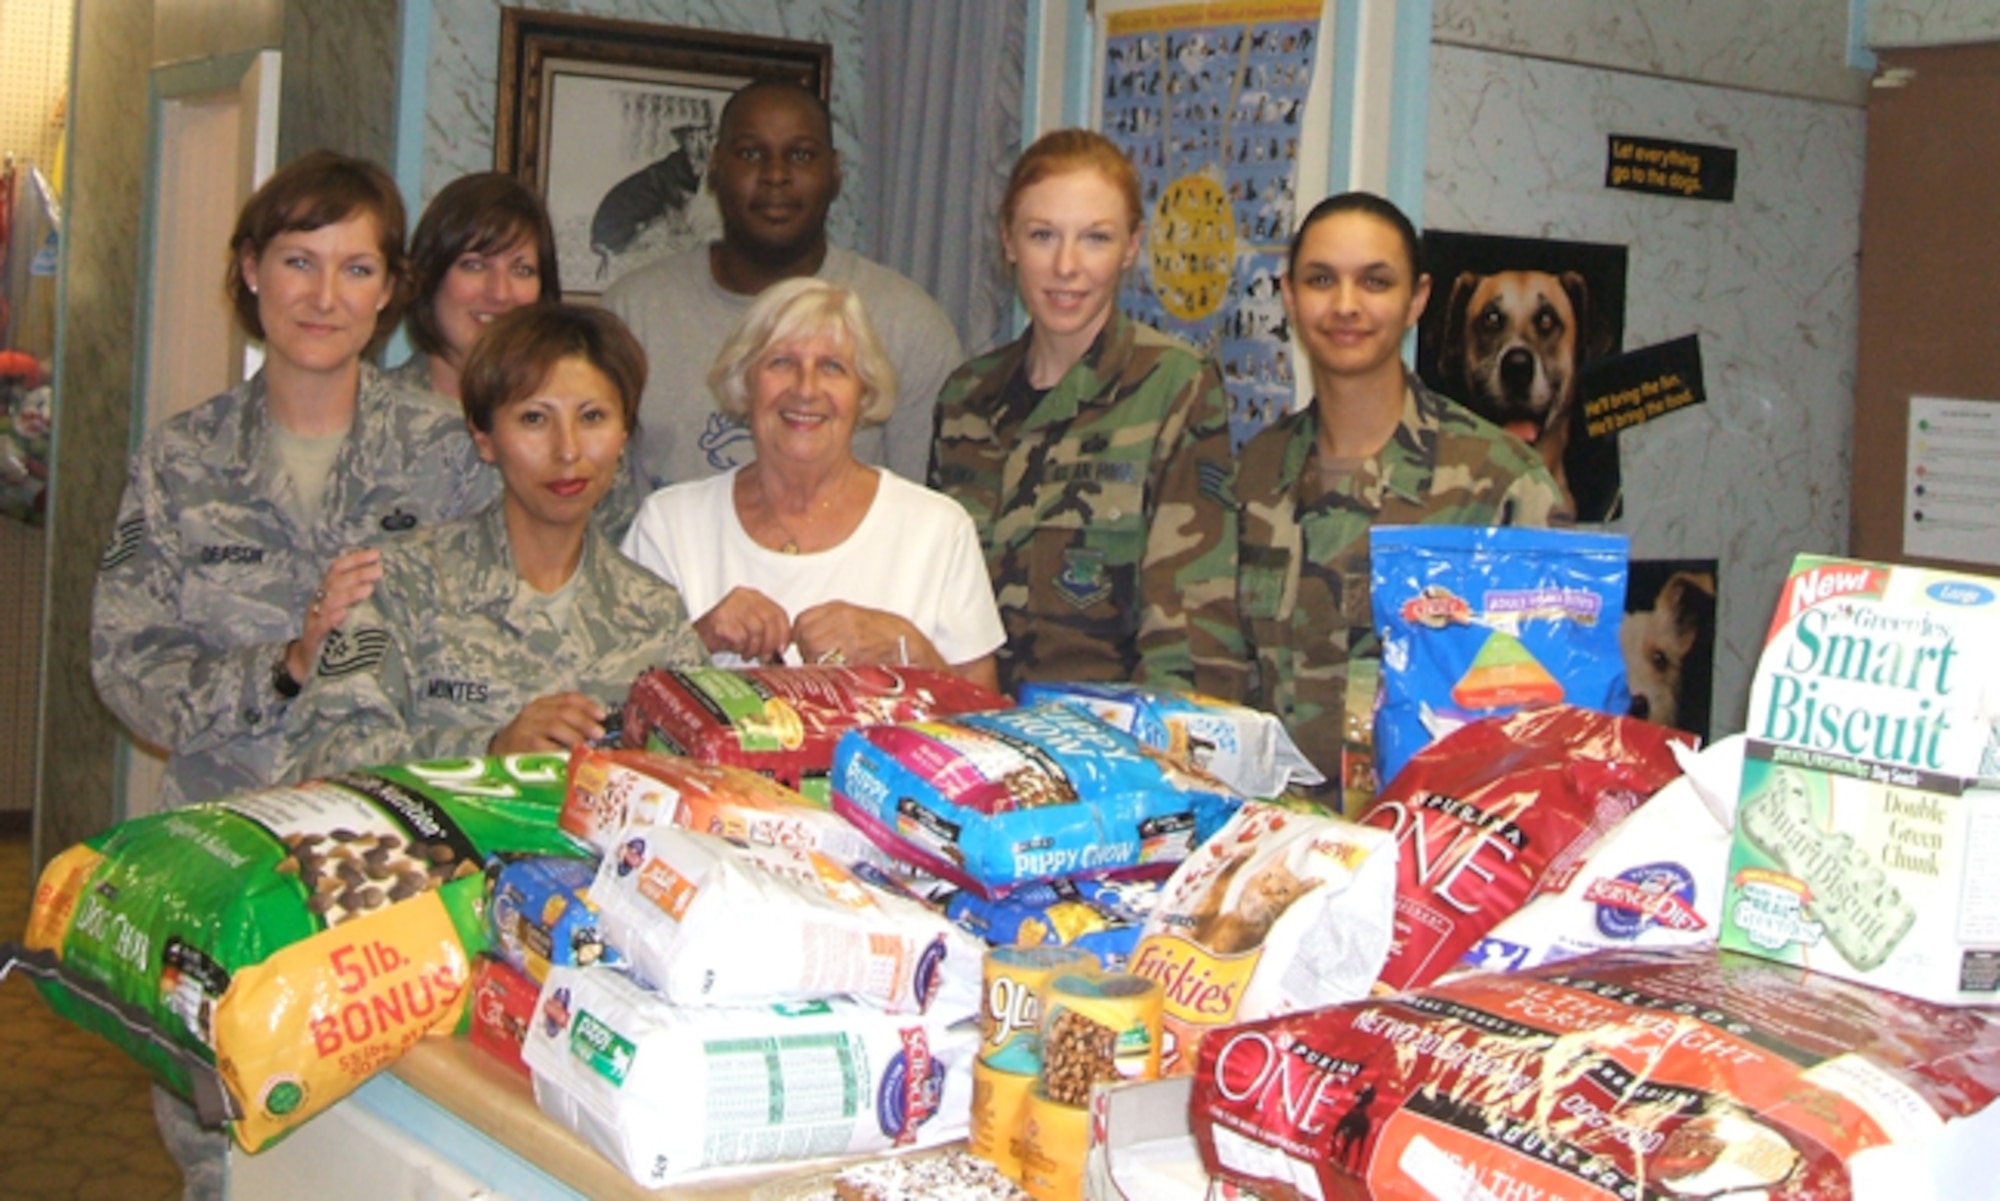 Members of the Air Force Personnel Center Junior Enlisted Council show off some of the donations raised recently to support the Universal City Animal Shelter. The council raised 756 pounds of food, 224 pounds of cat litter, 16 pounds of treats and $155. From left, front row, are Tech. Sgt. Sara Montes and Aina Blake; back row, Tech. Sgt. Sandra Deason, Staff Sgt. Tonya Posey, Sharod White, Staff Sgt. Simona Patrick and Senior Airman Janina-Eva White. (U.S. Air Force photo/File)